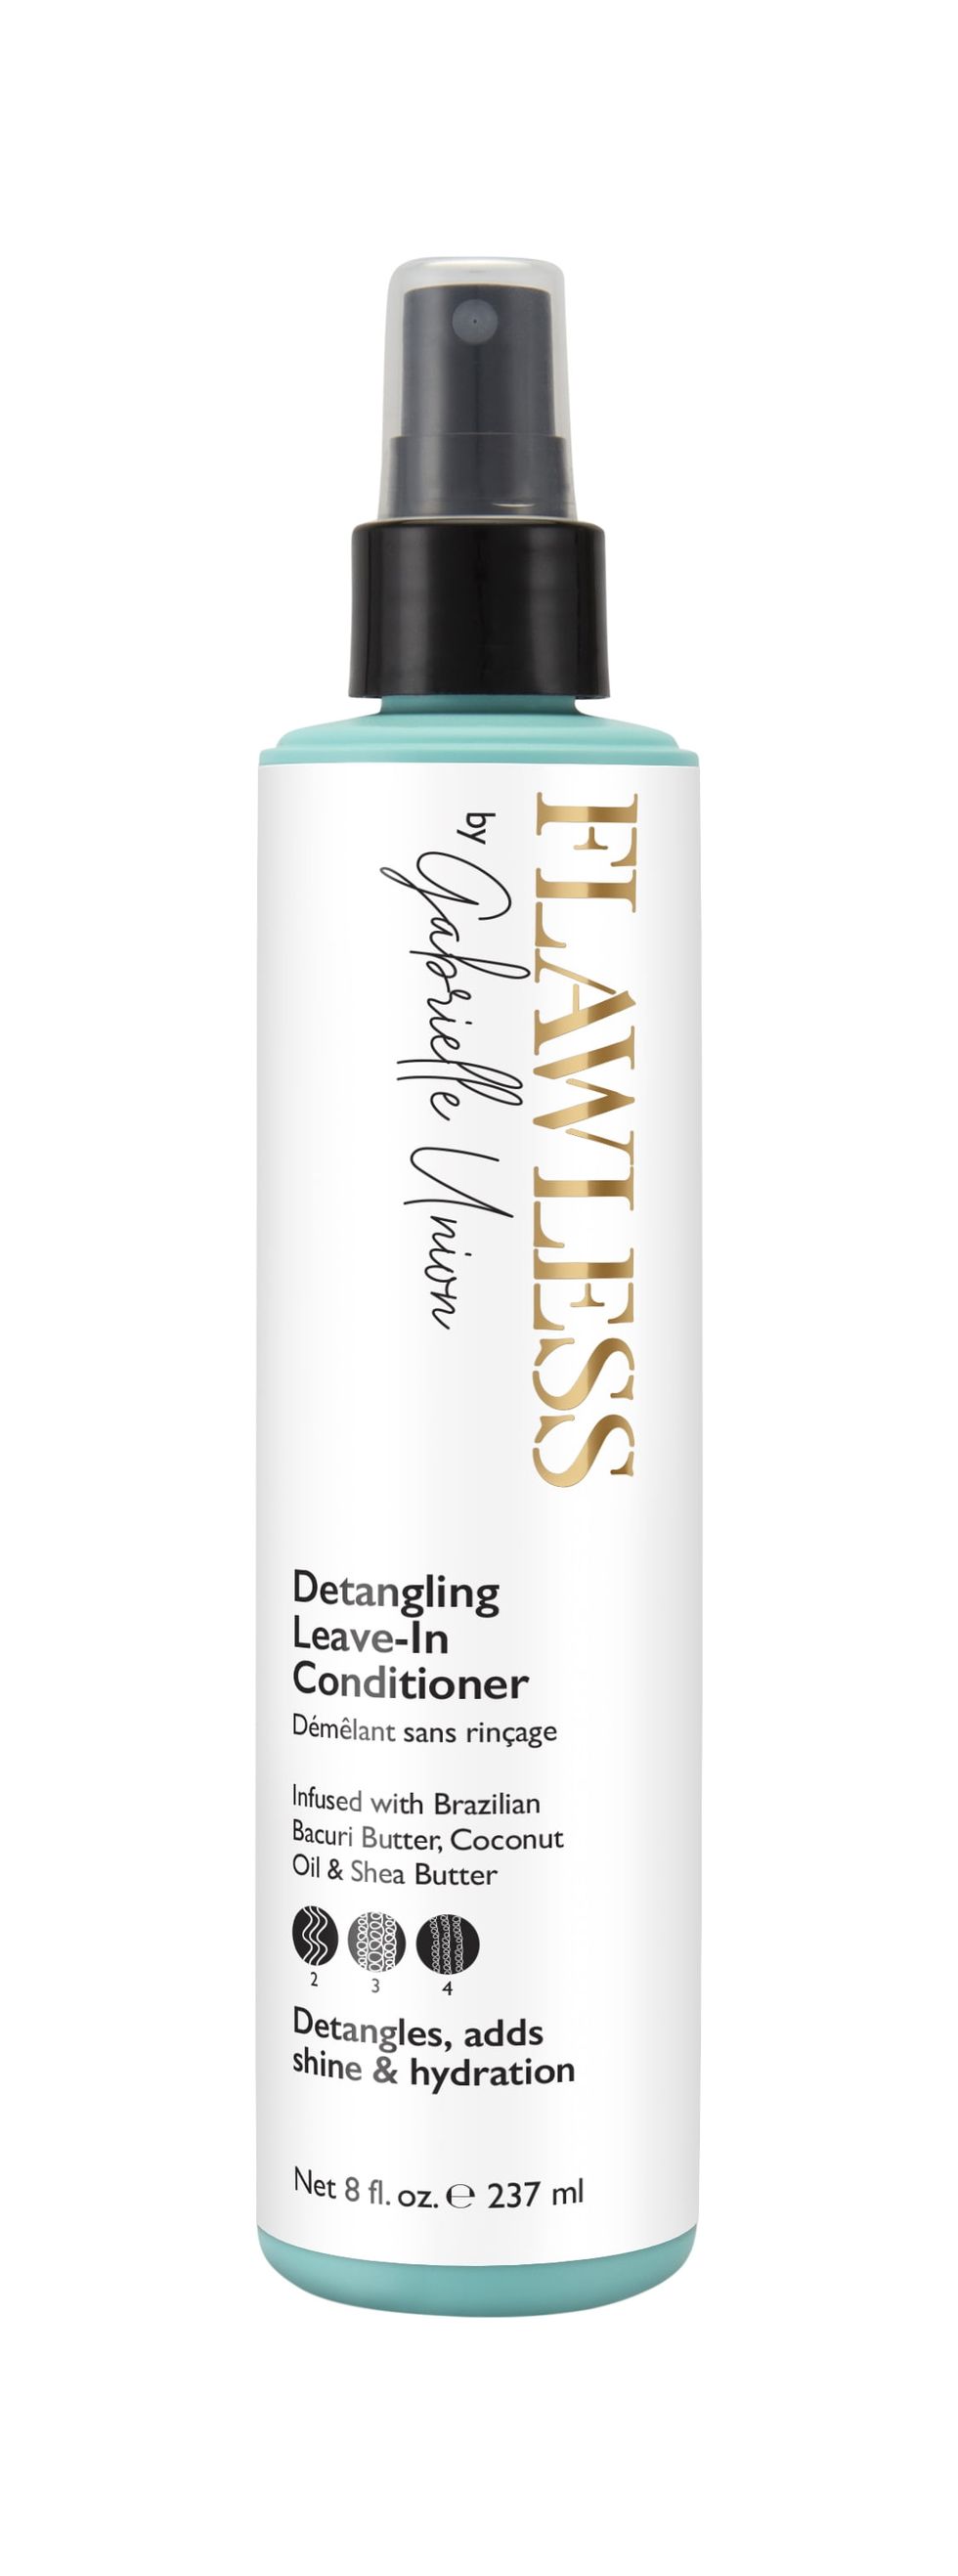 Detangling Leave-in Hair Conditioner 